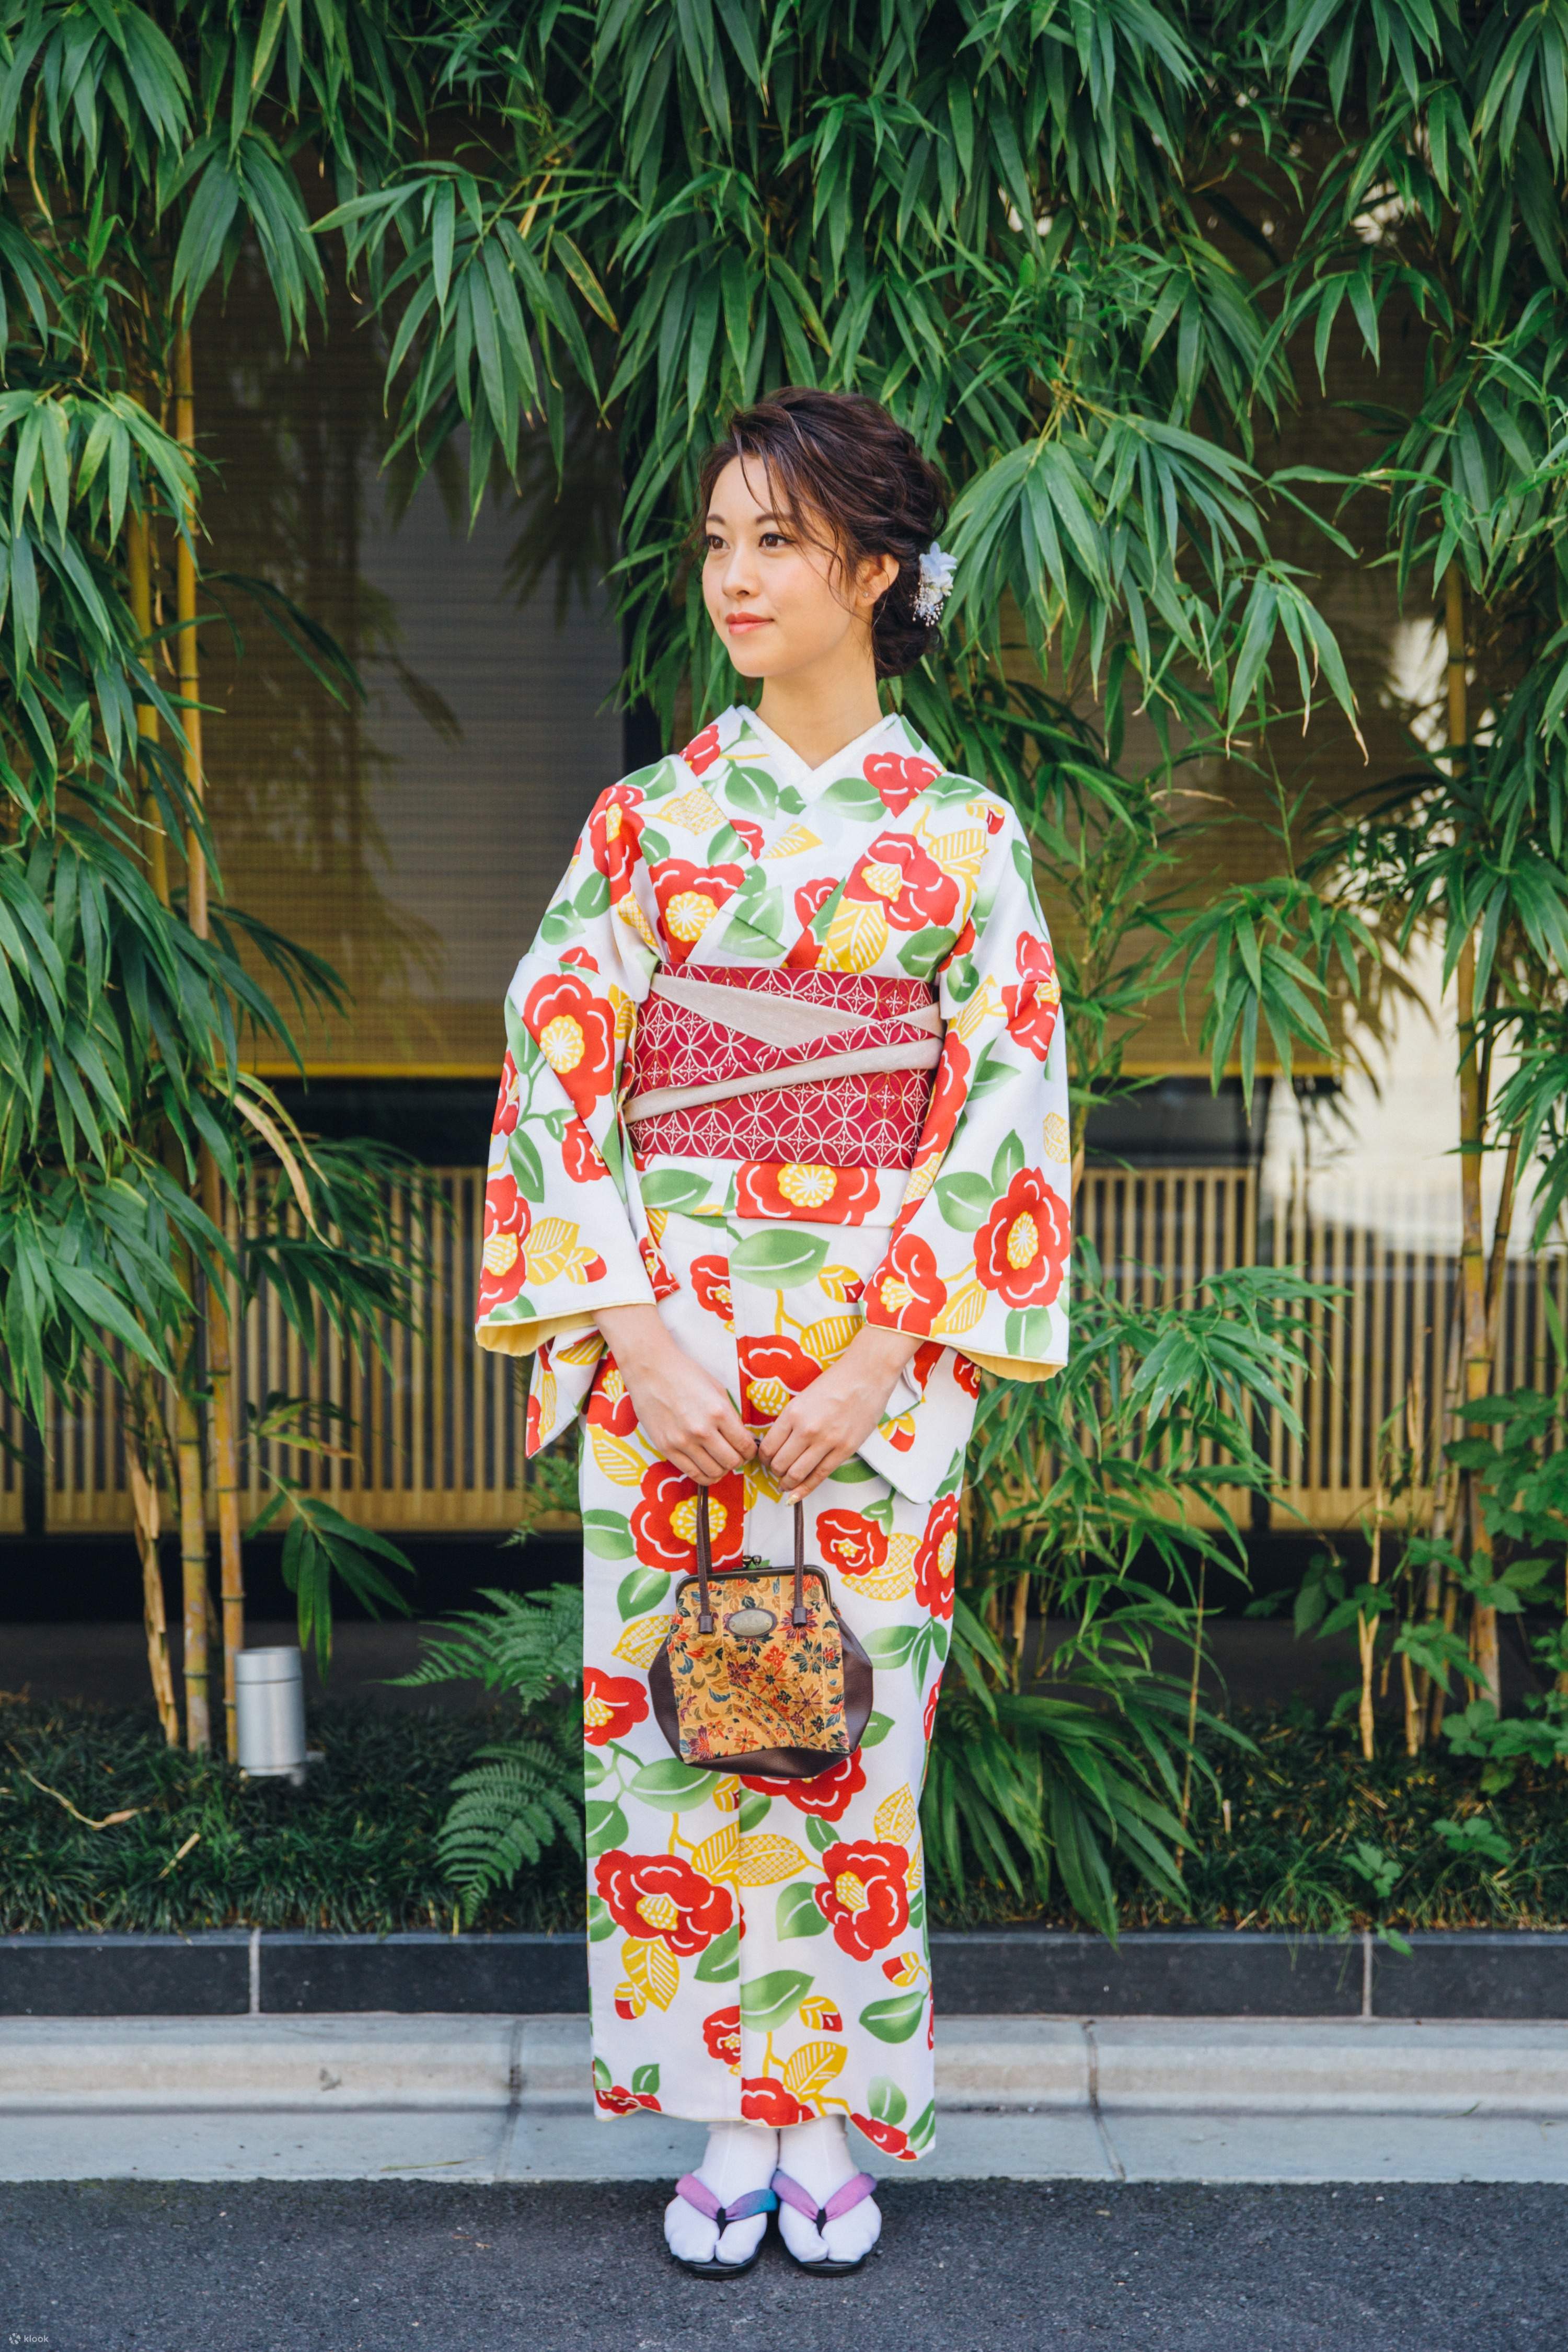 Recommended Experience in Autumn and Winter] Kyoto Kimono Rental Experience  l Chinese, English, Japanese and Korean support okl Close to Kiyomizudera  Temple, the Second Year Board, and the Third Year Board (Kyoto